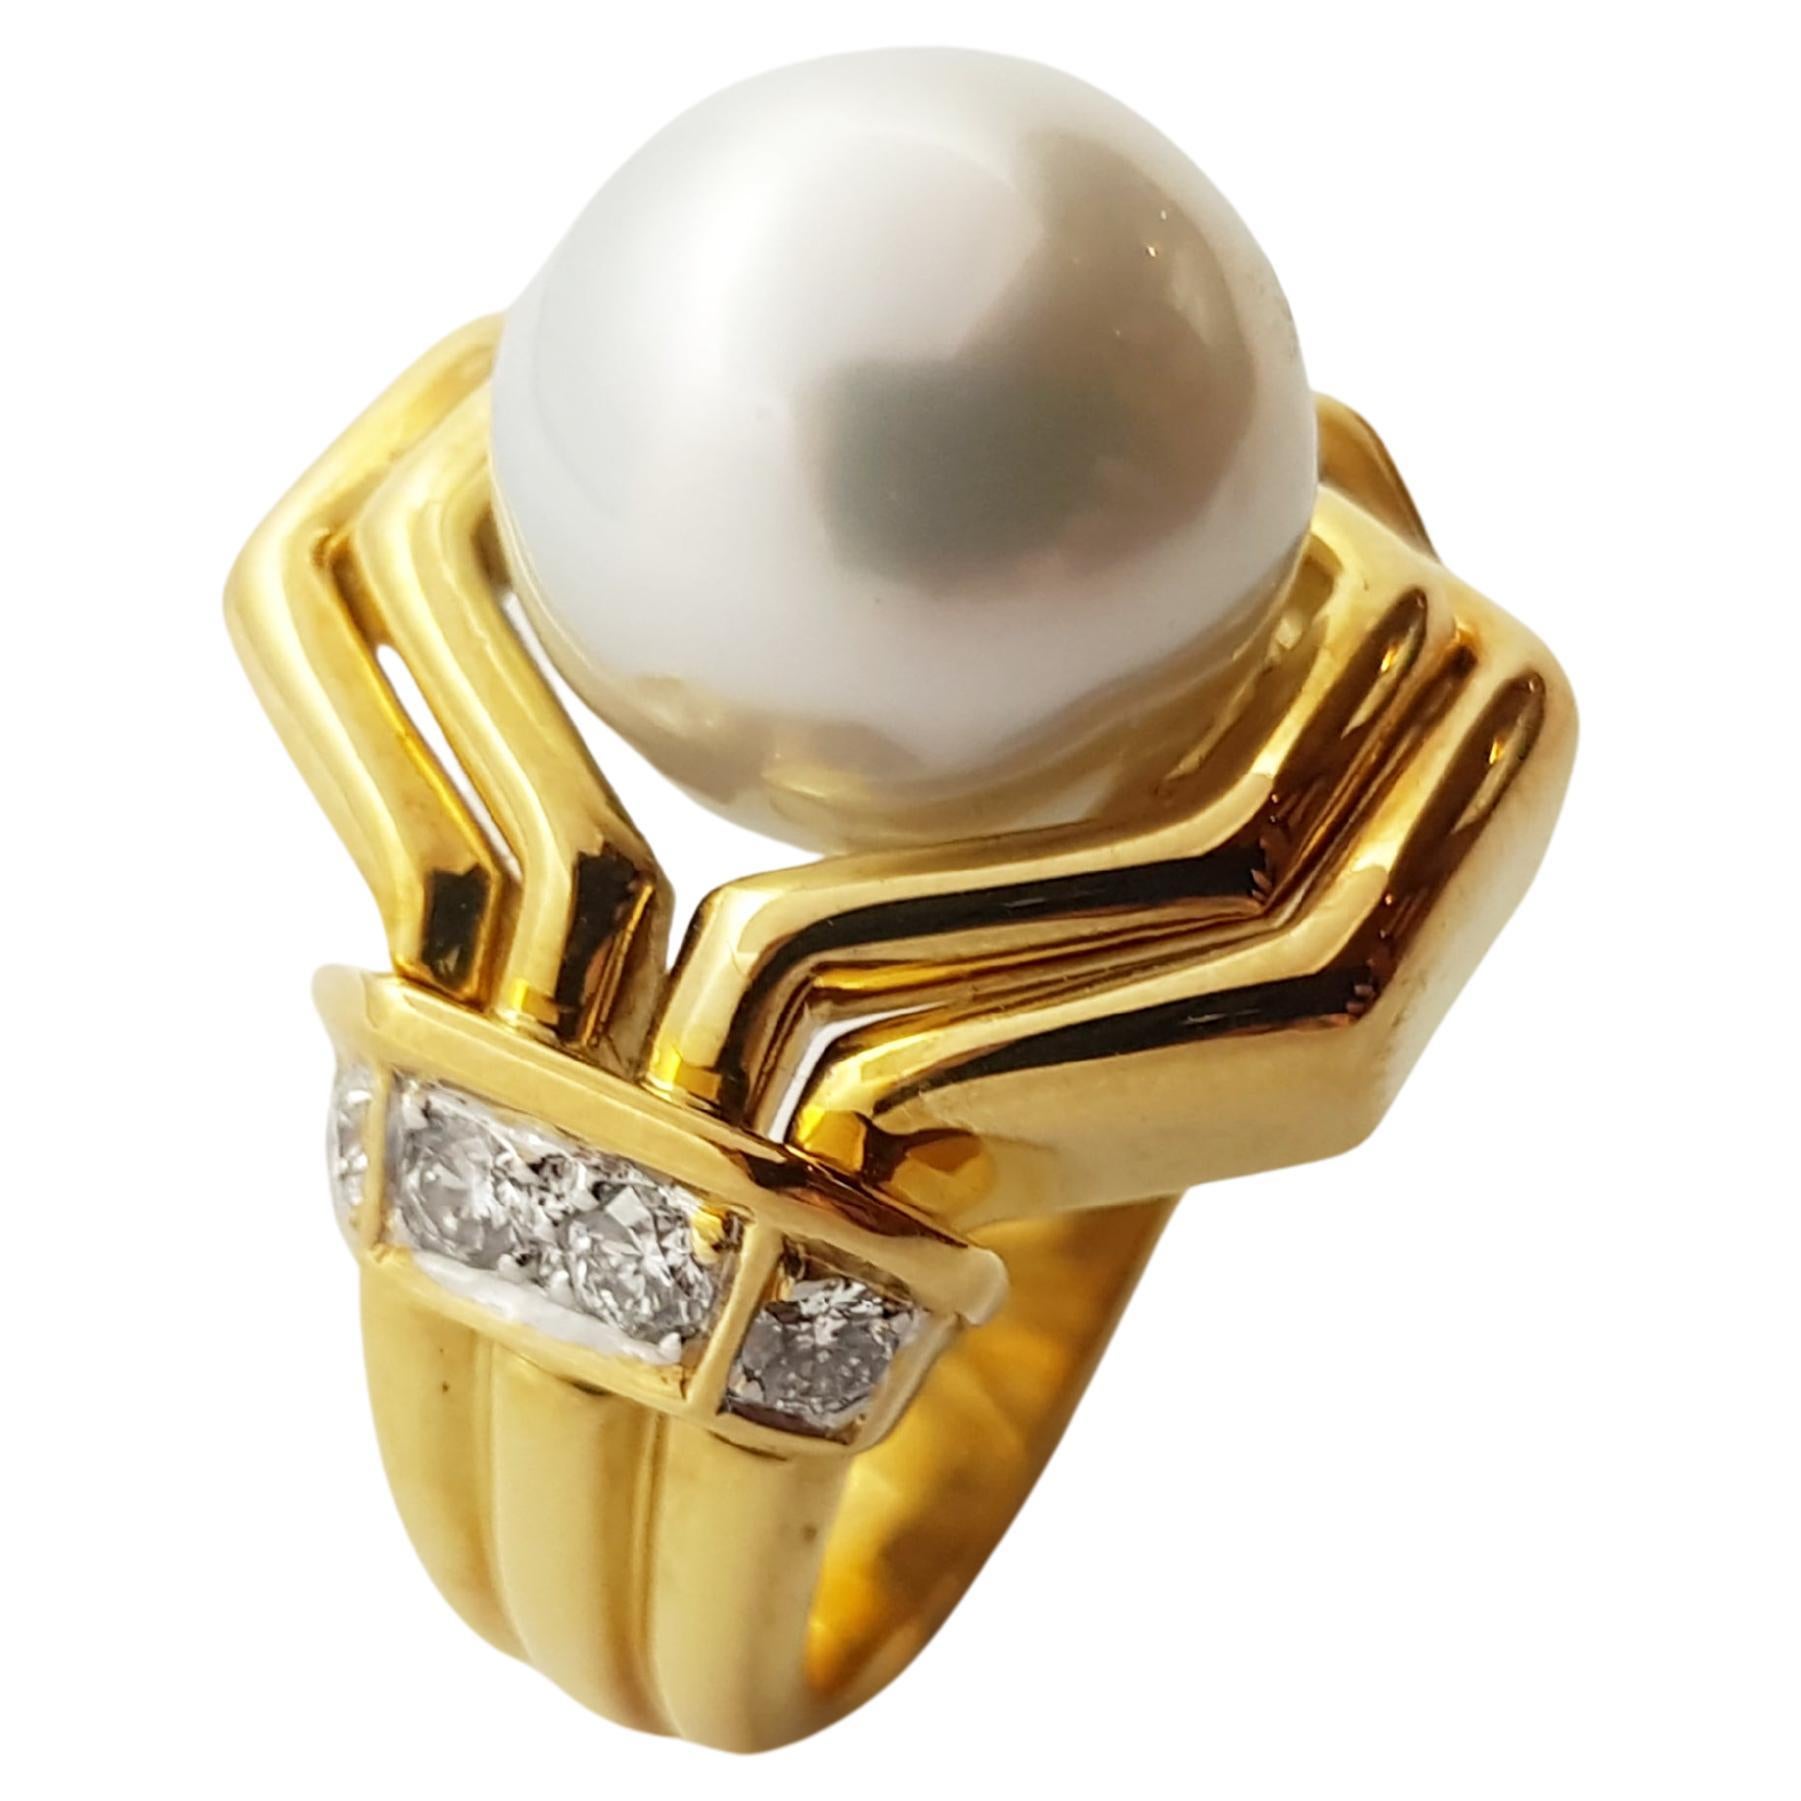 South Sea Pearl with Diamond Ring Set in 18 Karat Gold Settings